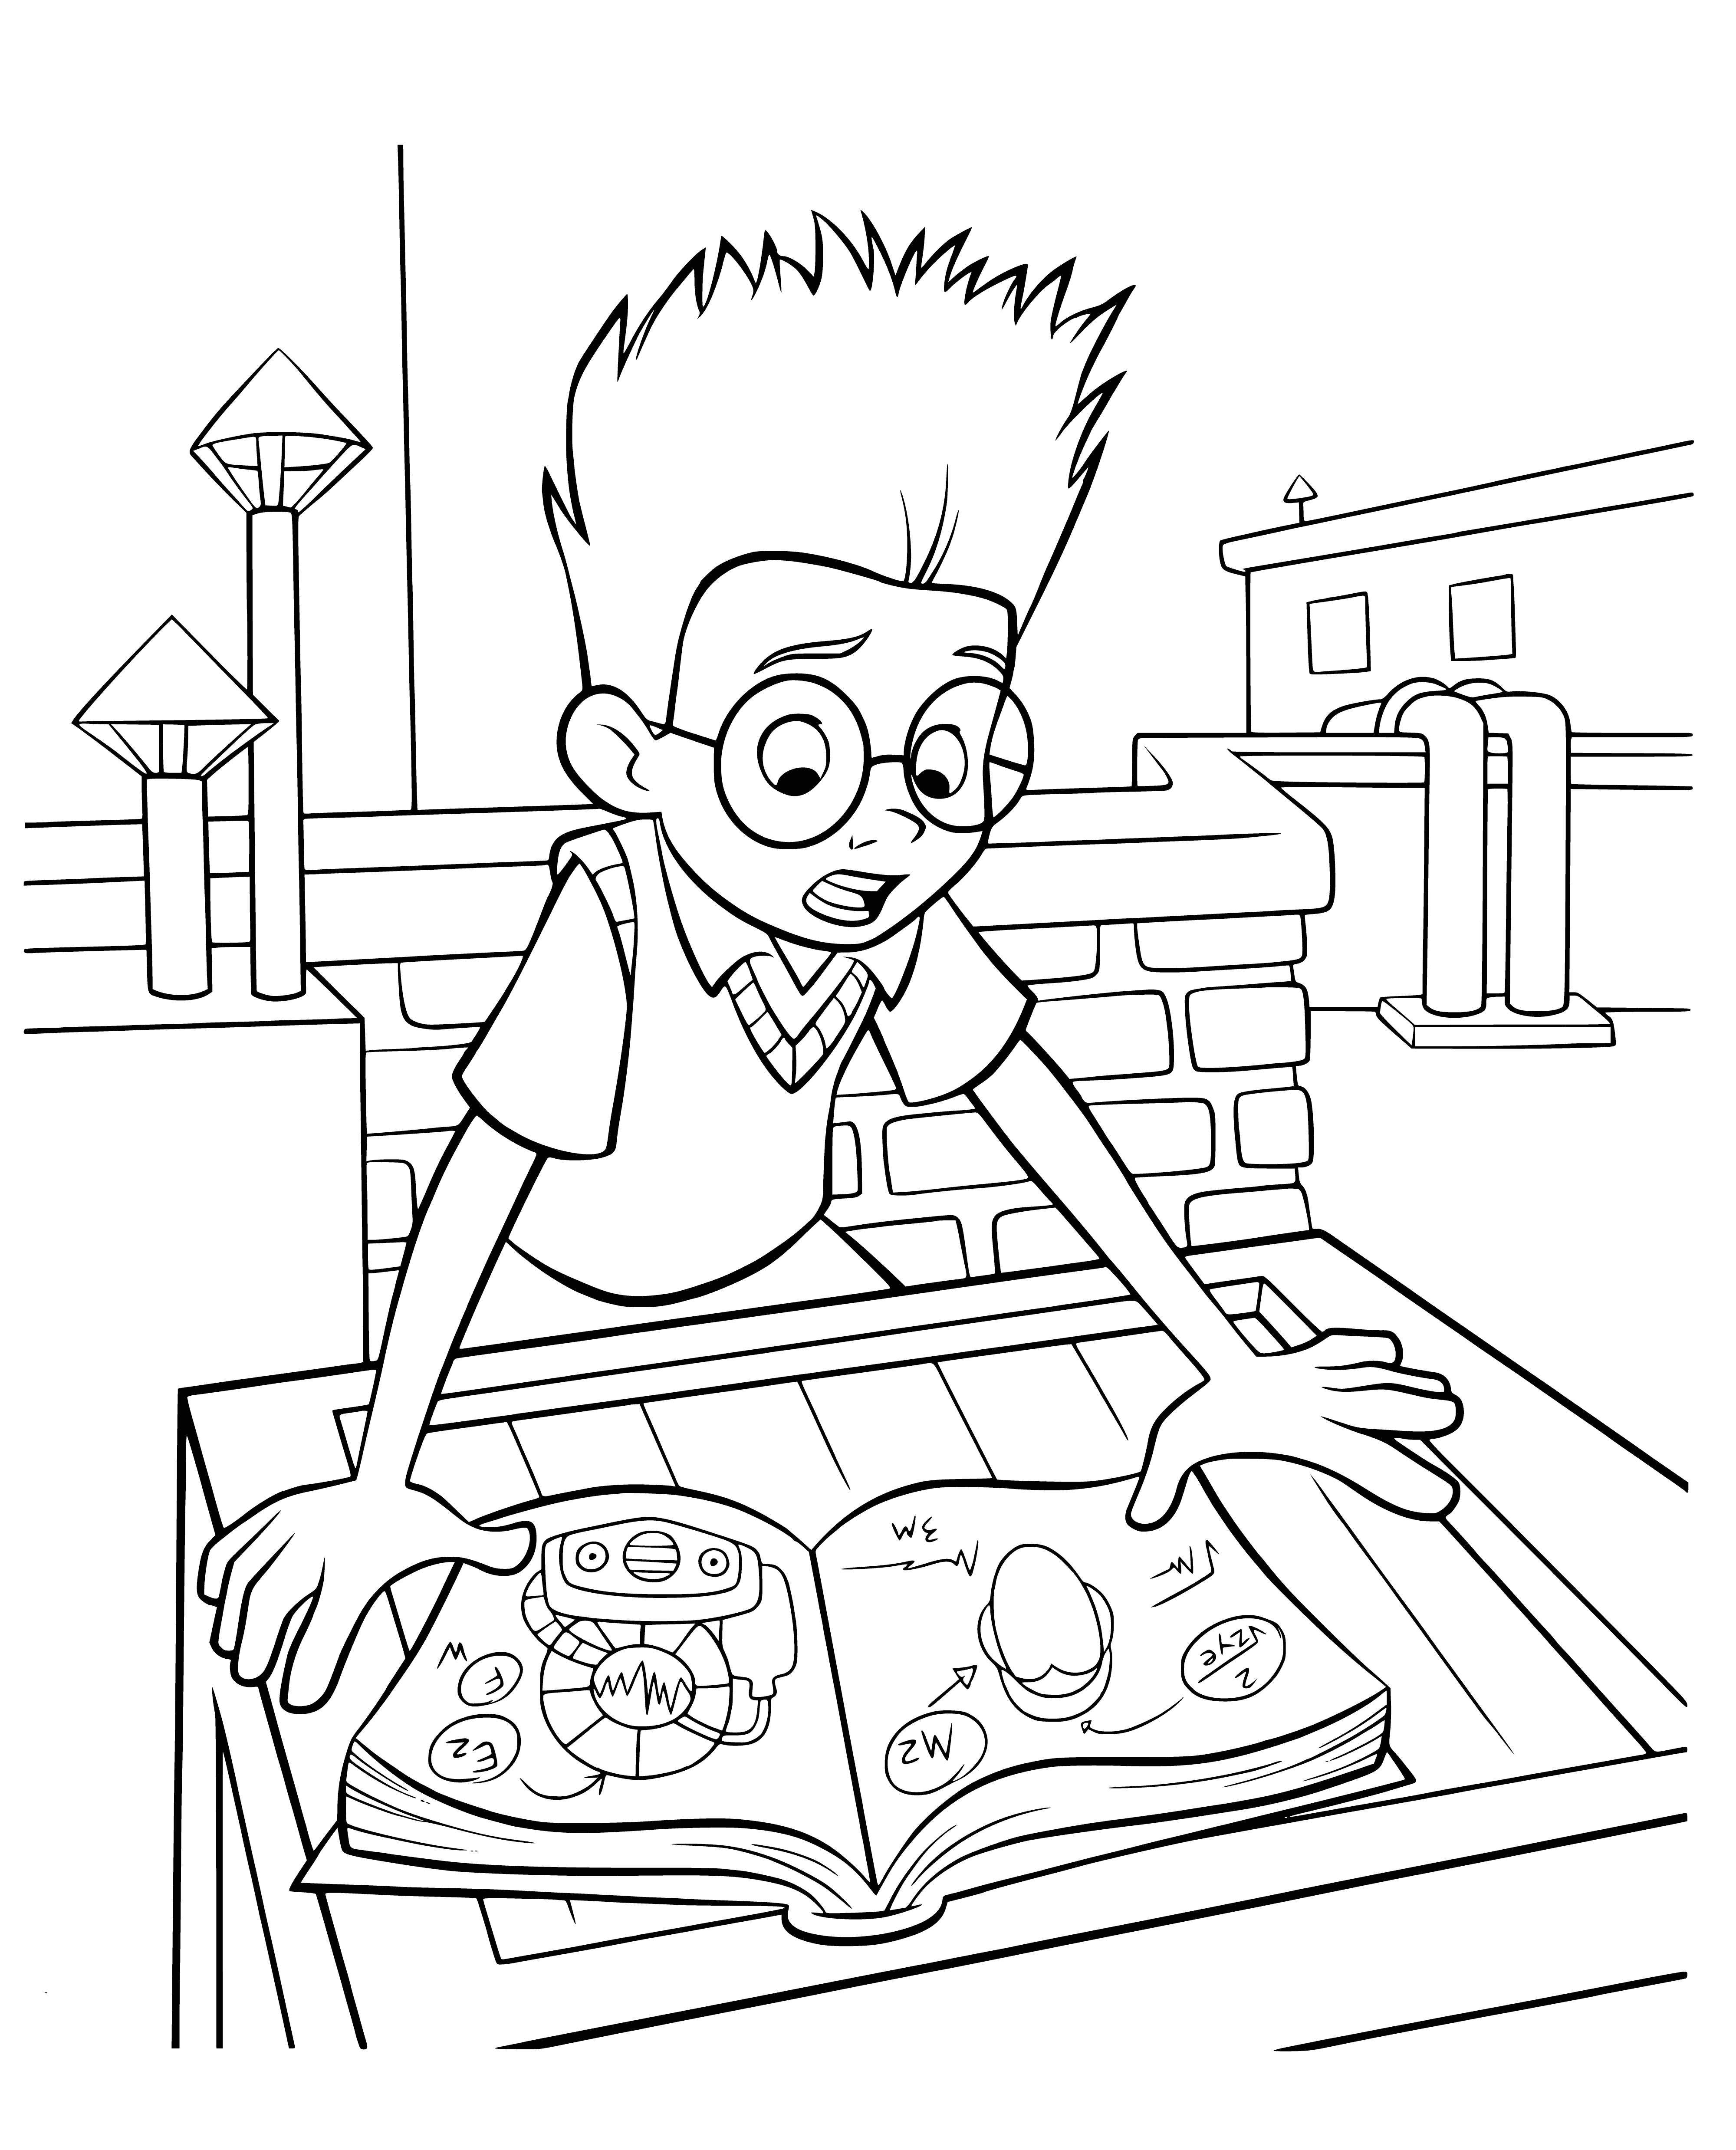 coloring page: Tall boy with glasses, bowl cut looks at mechanical device; brown-haired girl admires, confused; dog sits beside her.